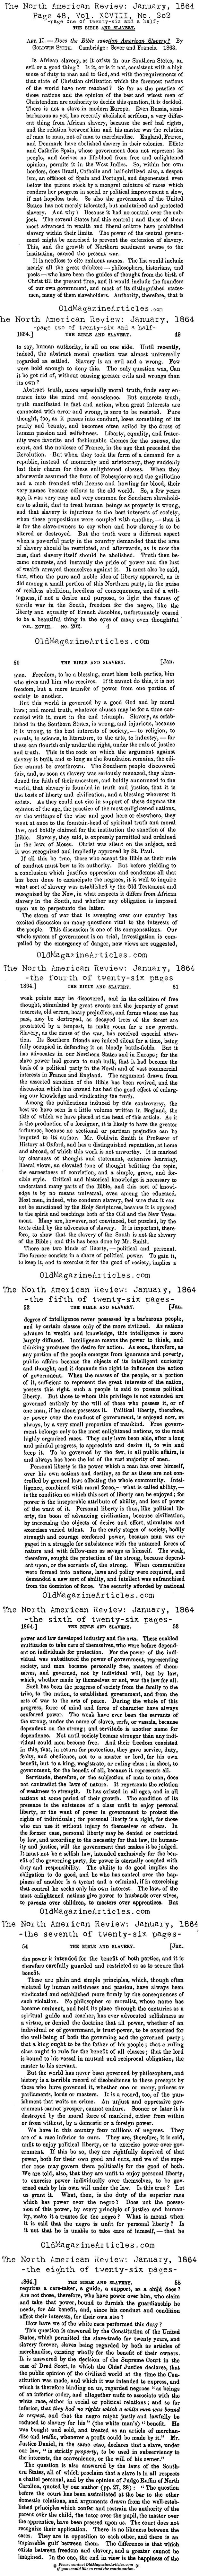 The Bible and Slavery - Part 1 - (The North American Review, 1864)